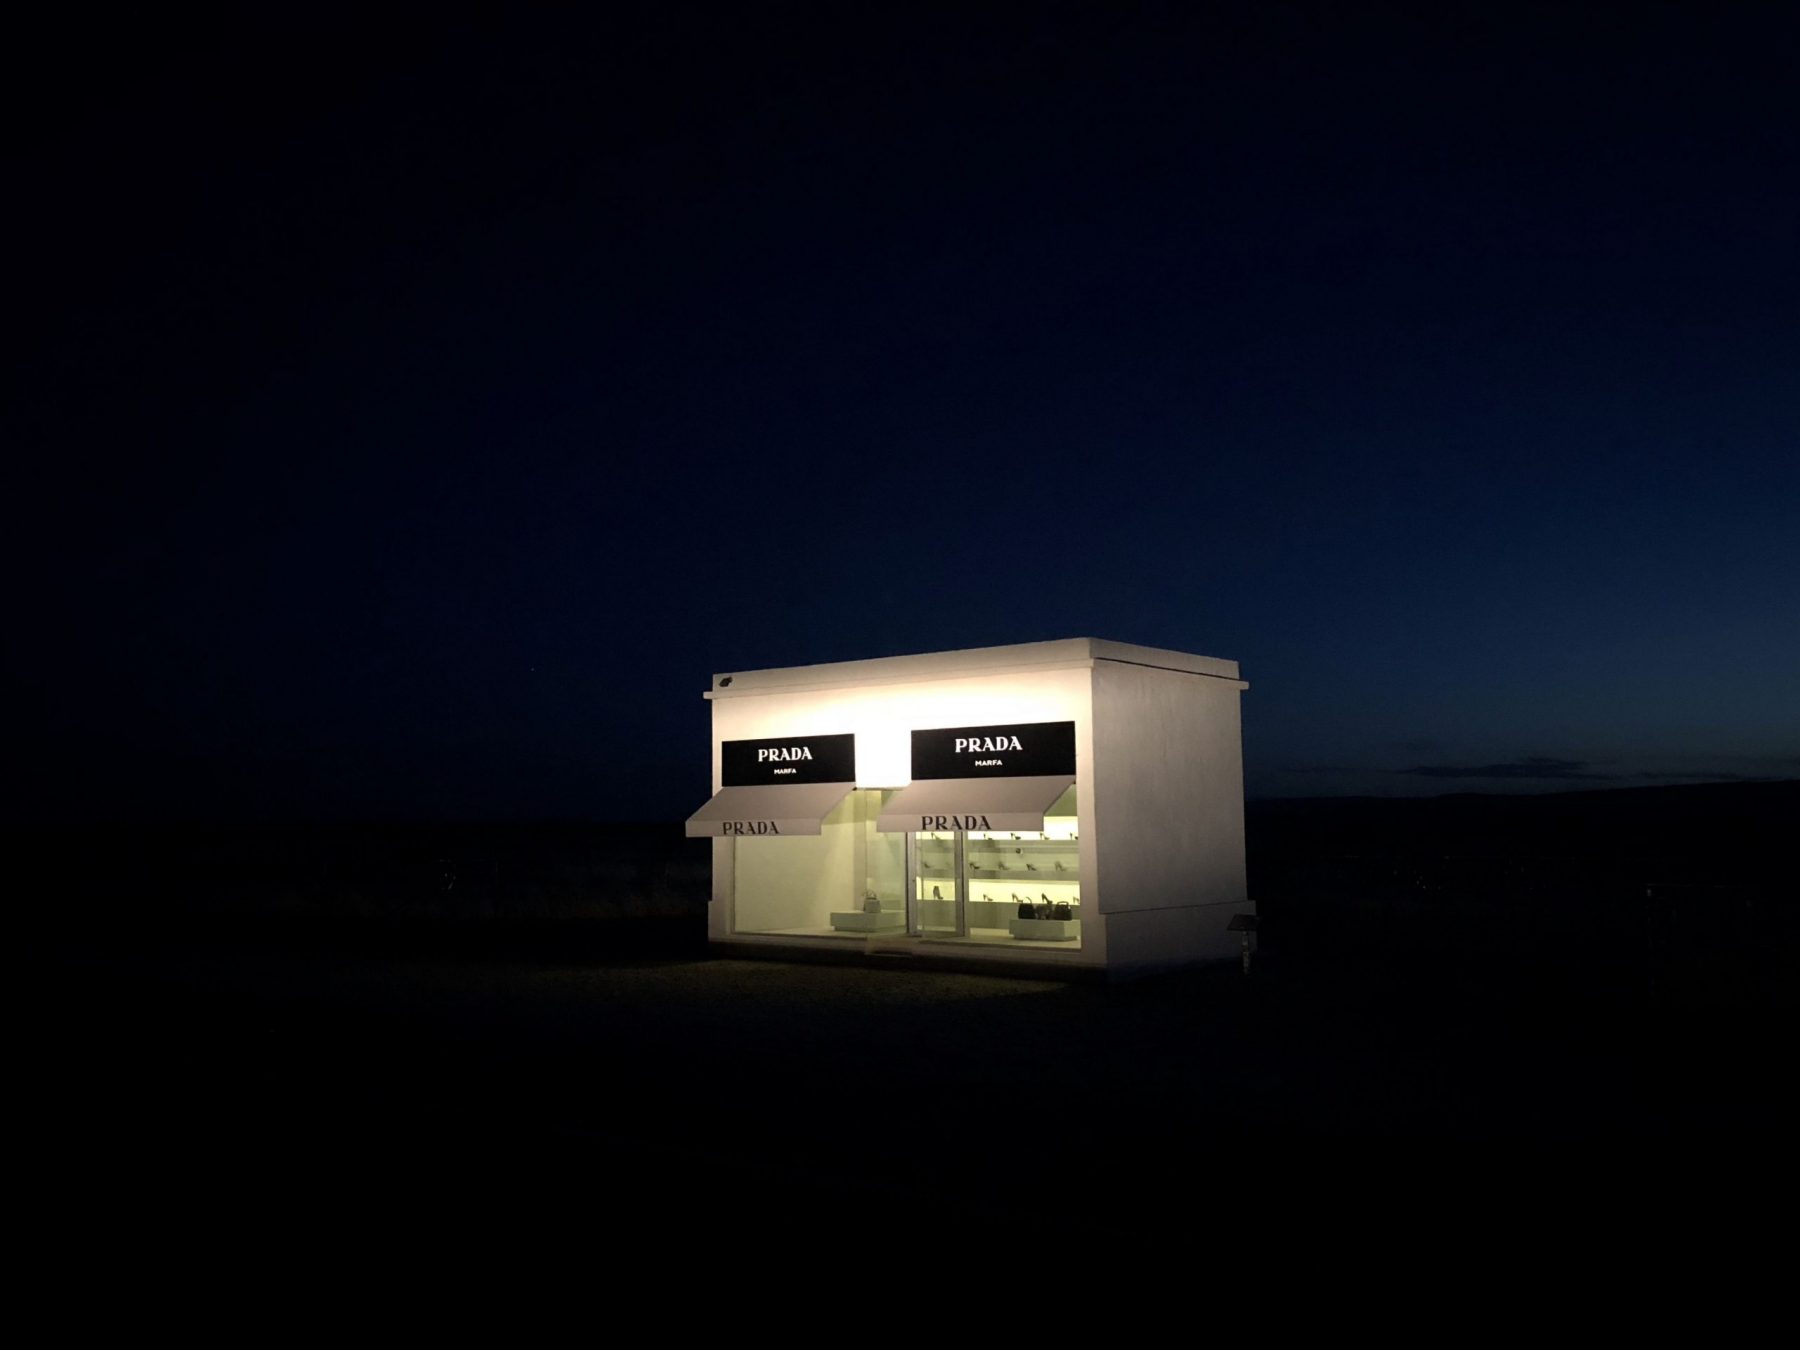 A photo of an illuminated building in total darkness